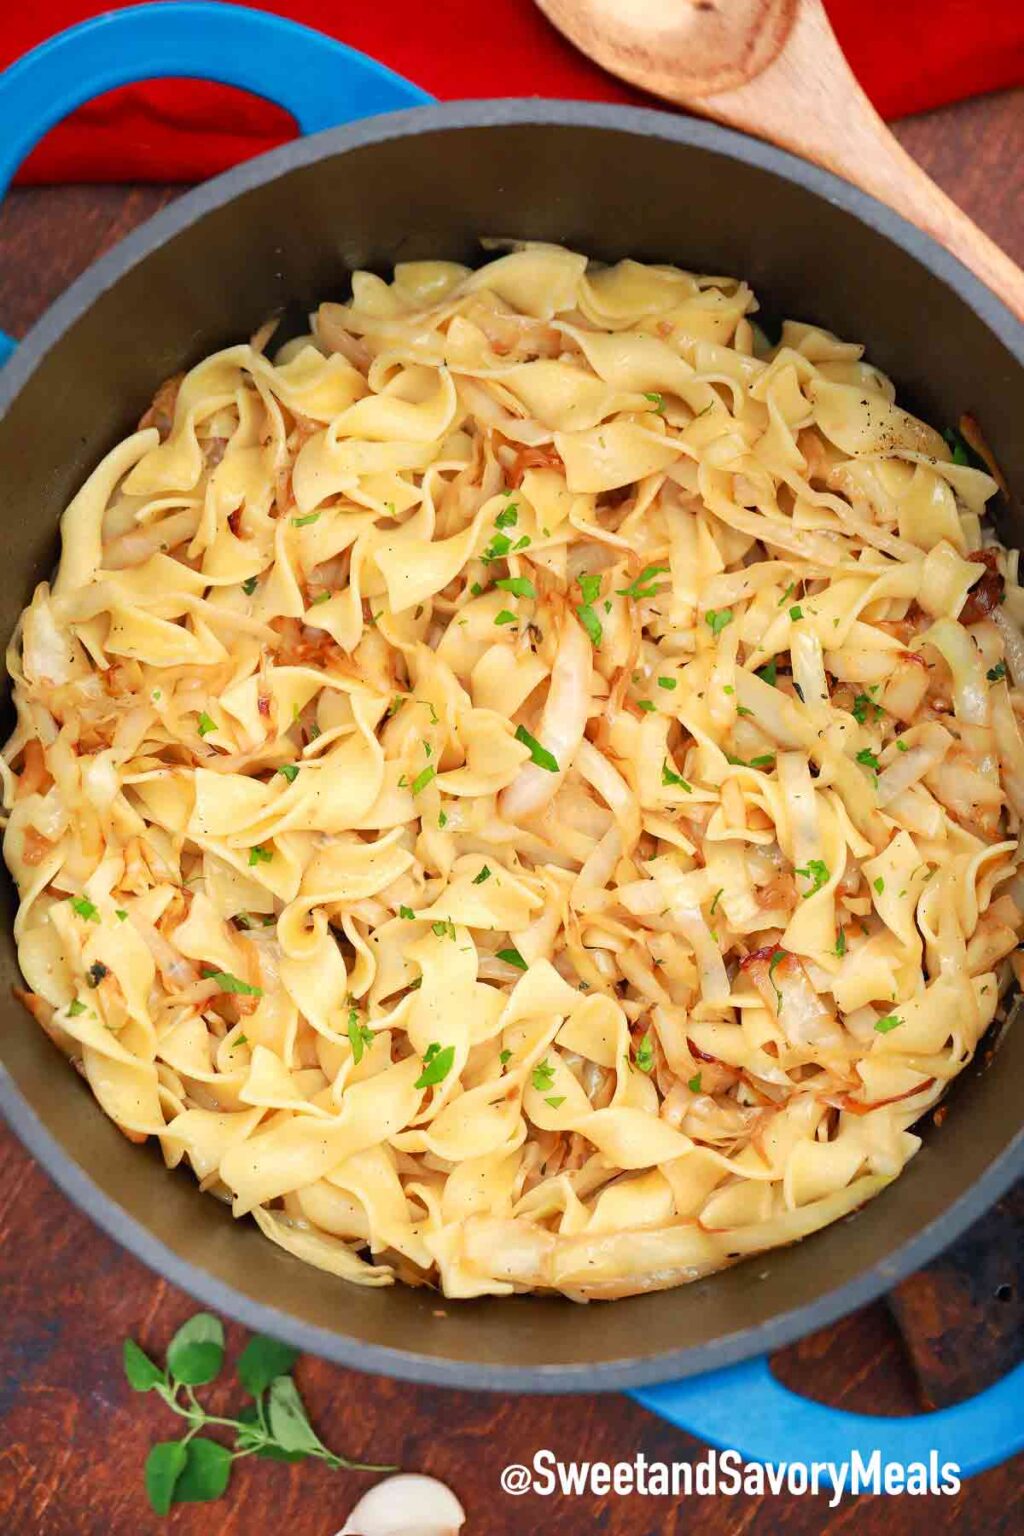 Fried Cabbage and Noodles Recipe - Haluski - Sweet and Savory Meals